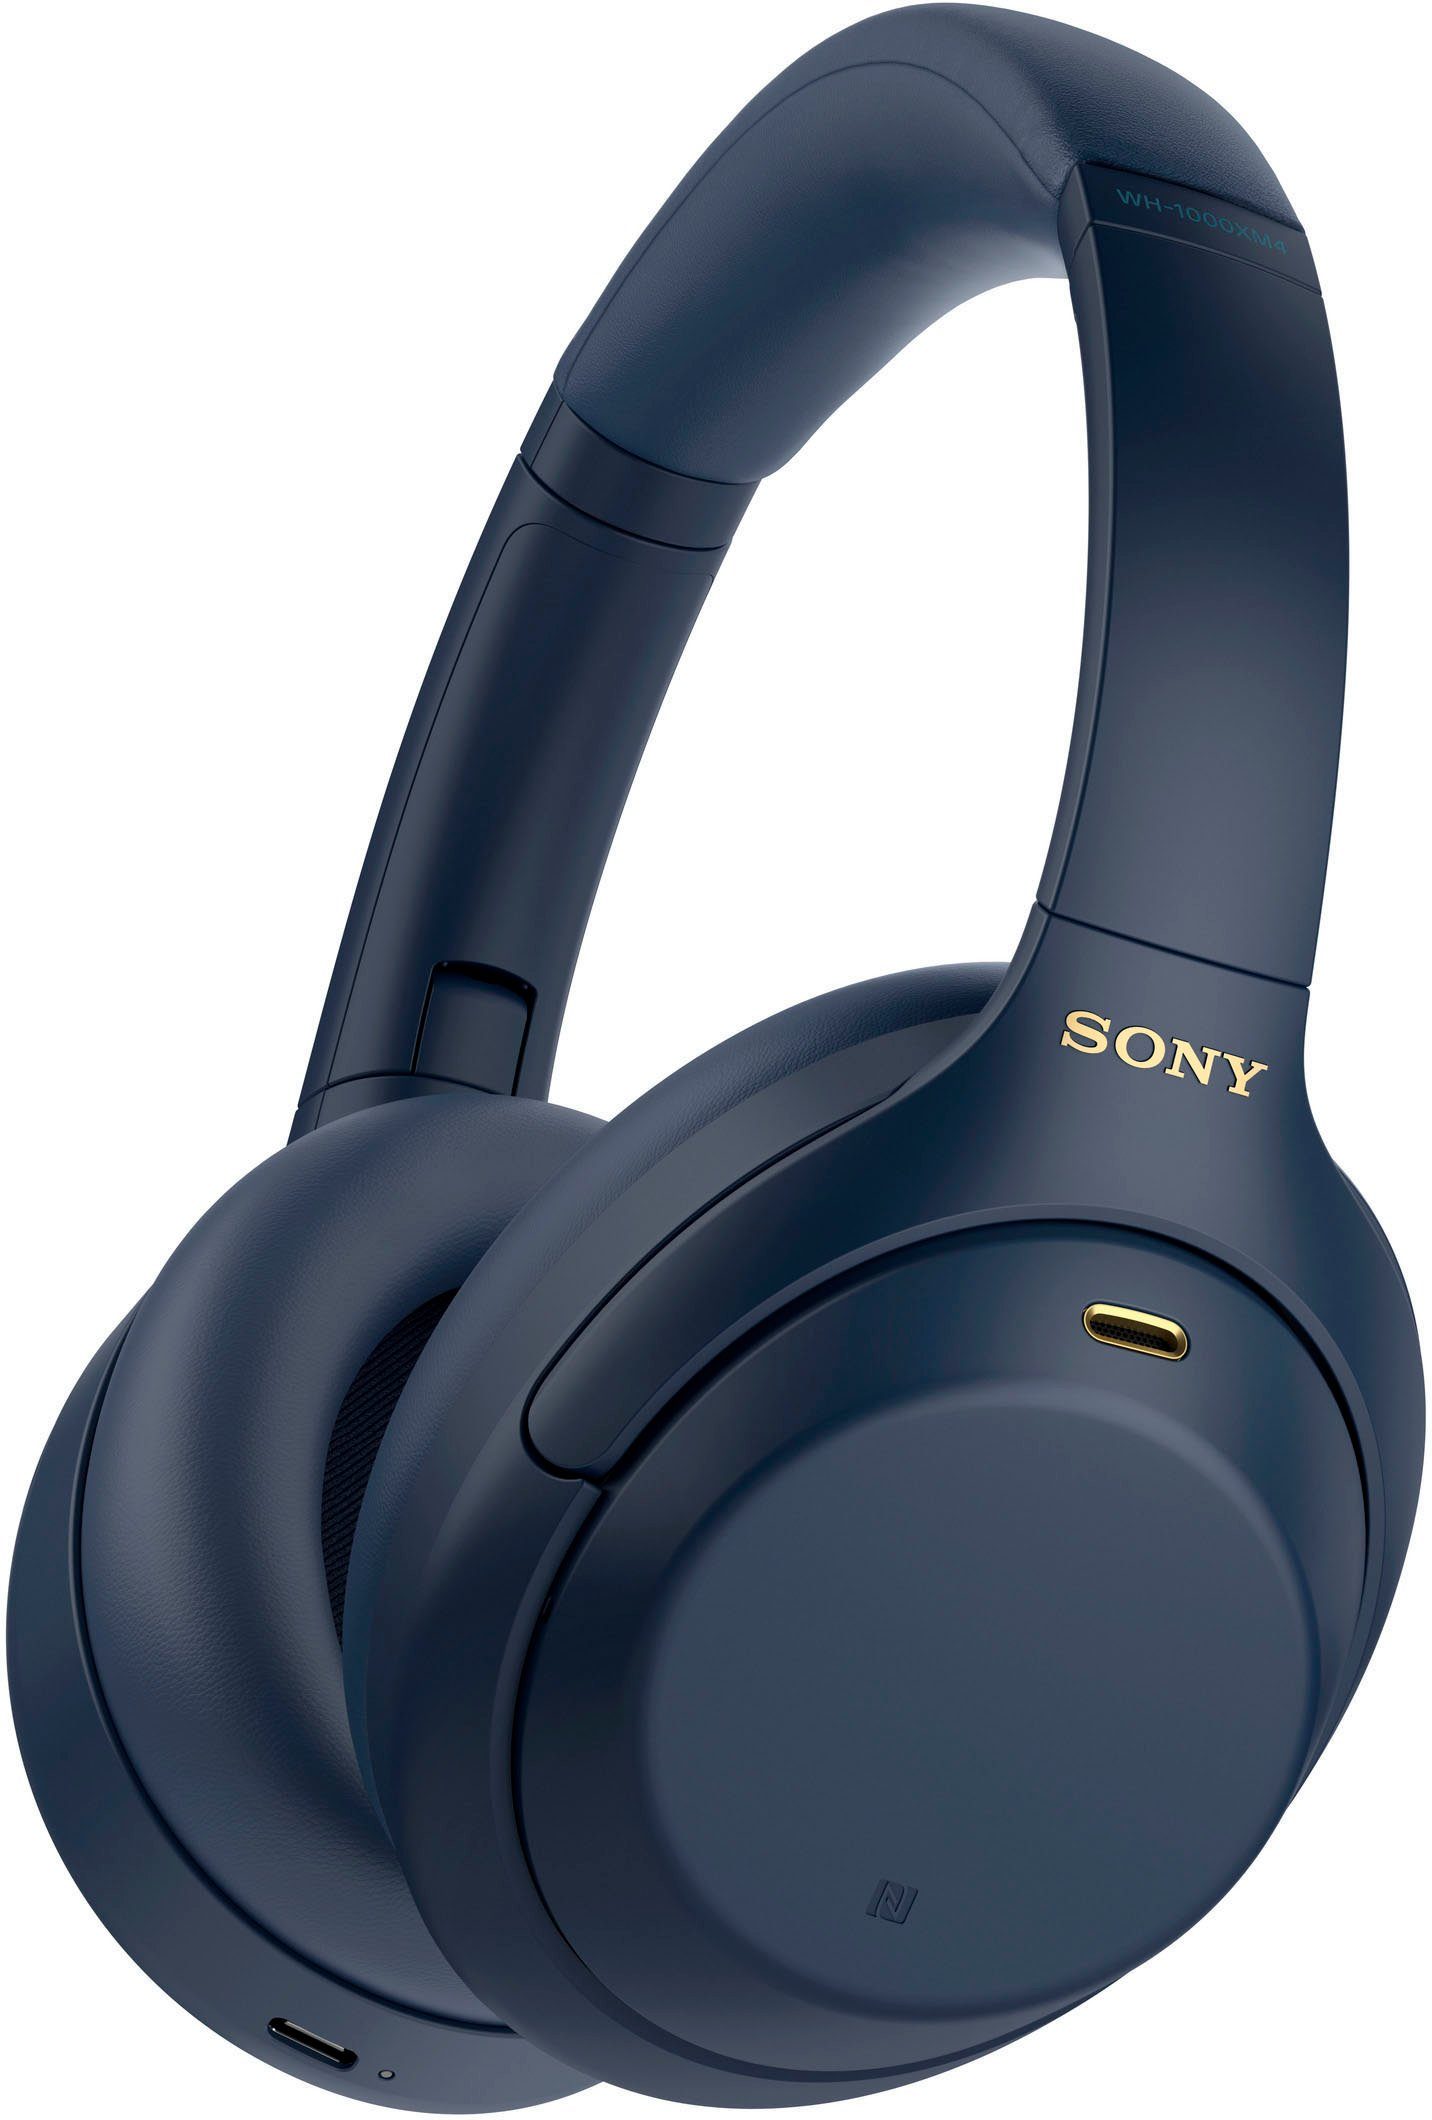 (Noise-Cancelling, Touch blau Bluetooth, One-Touch Verbindung NFC, Sony via Schnellladefunktion) WH-1000XM4 kabelloser NFC, Over-Ear-Kopfhörer Sensor,